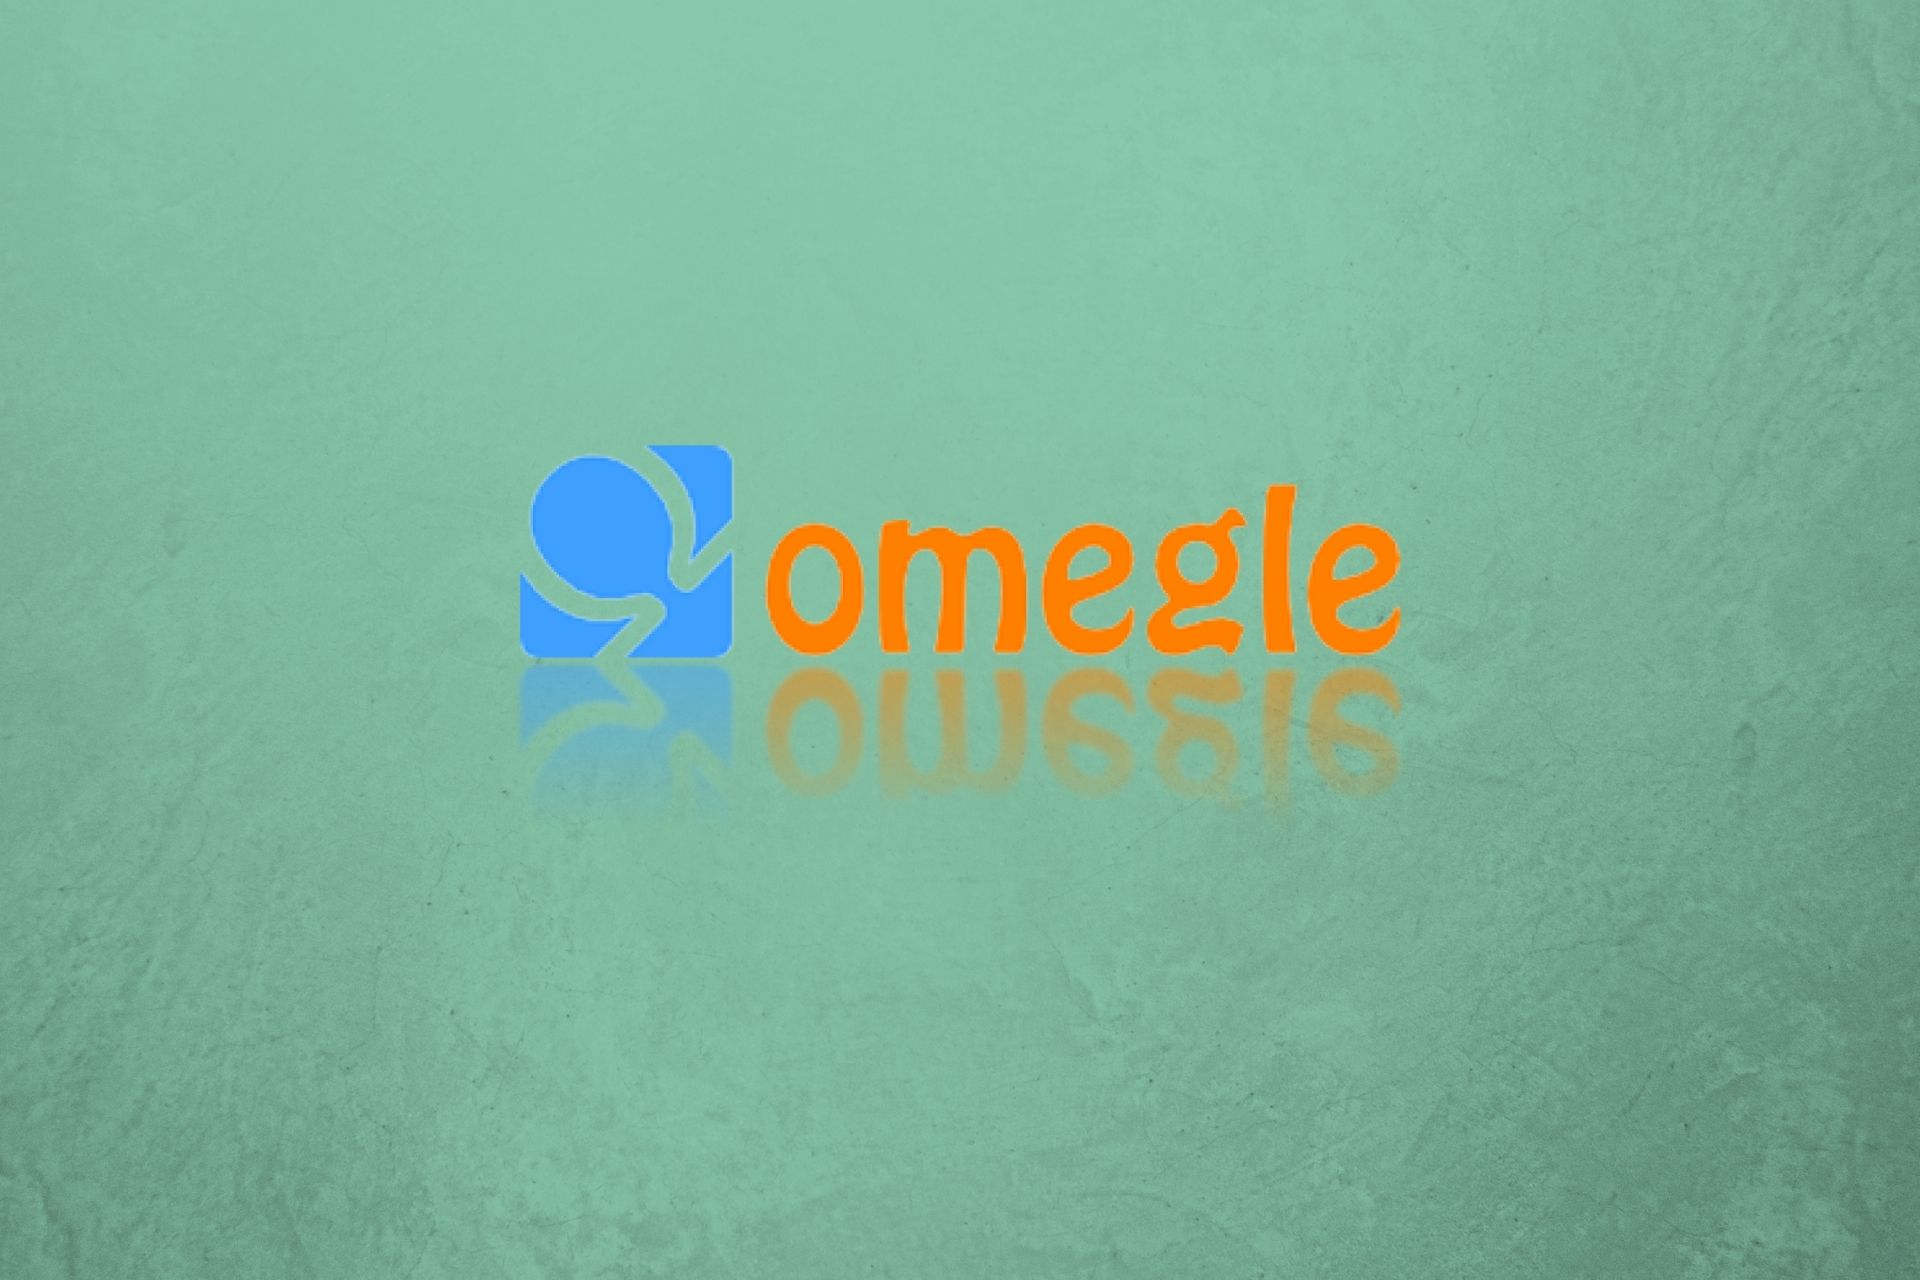 Can you use omegle video on xbox one